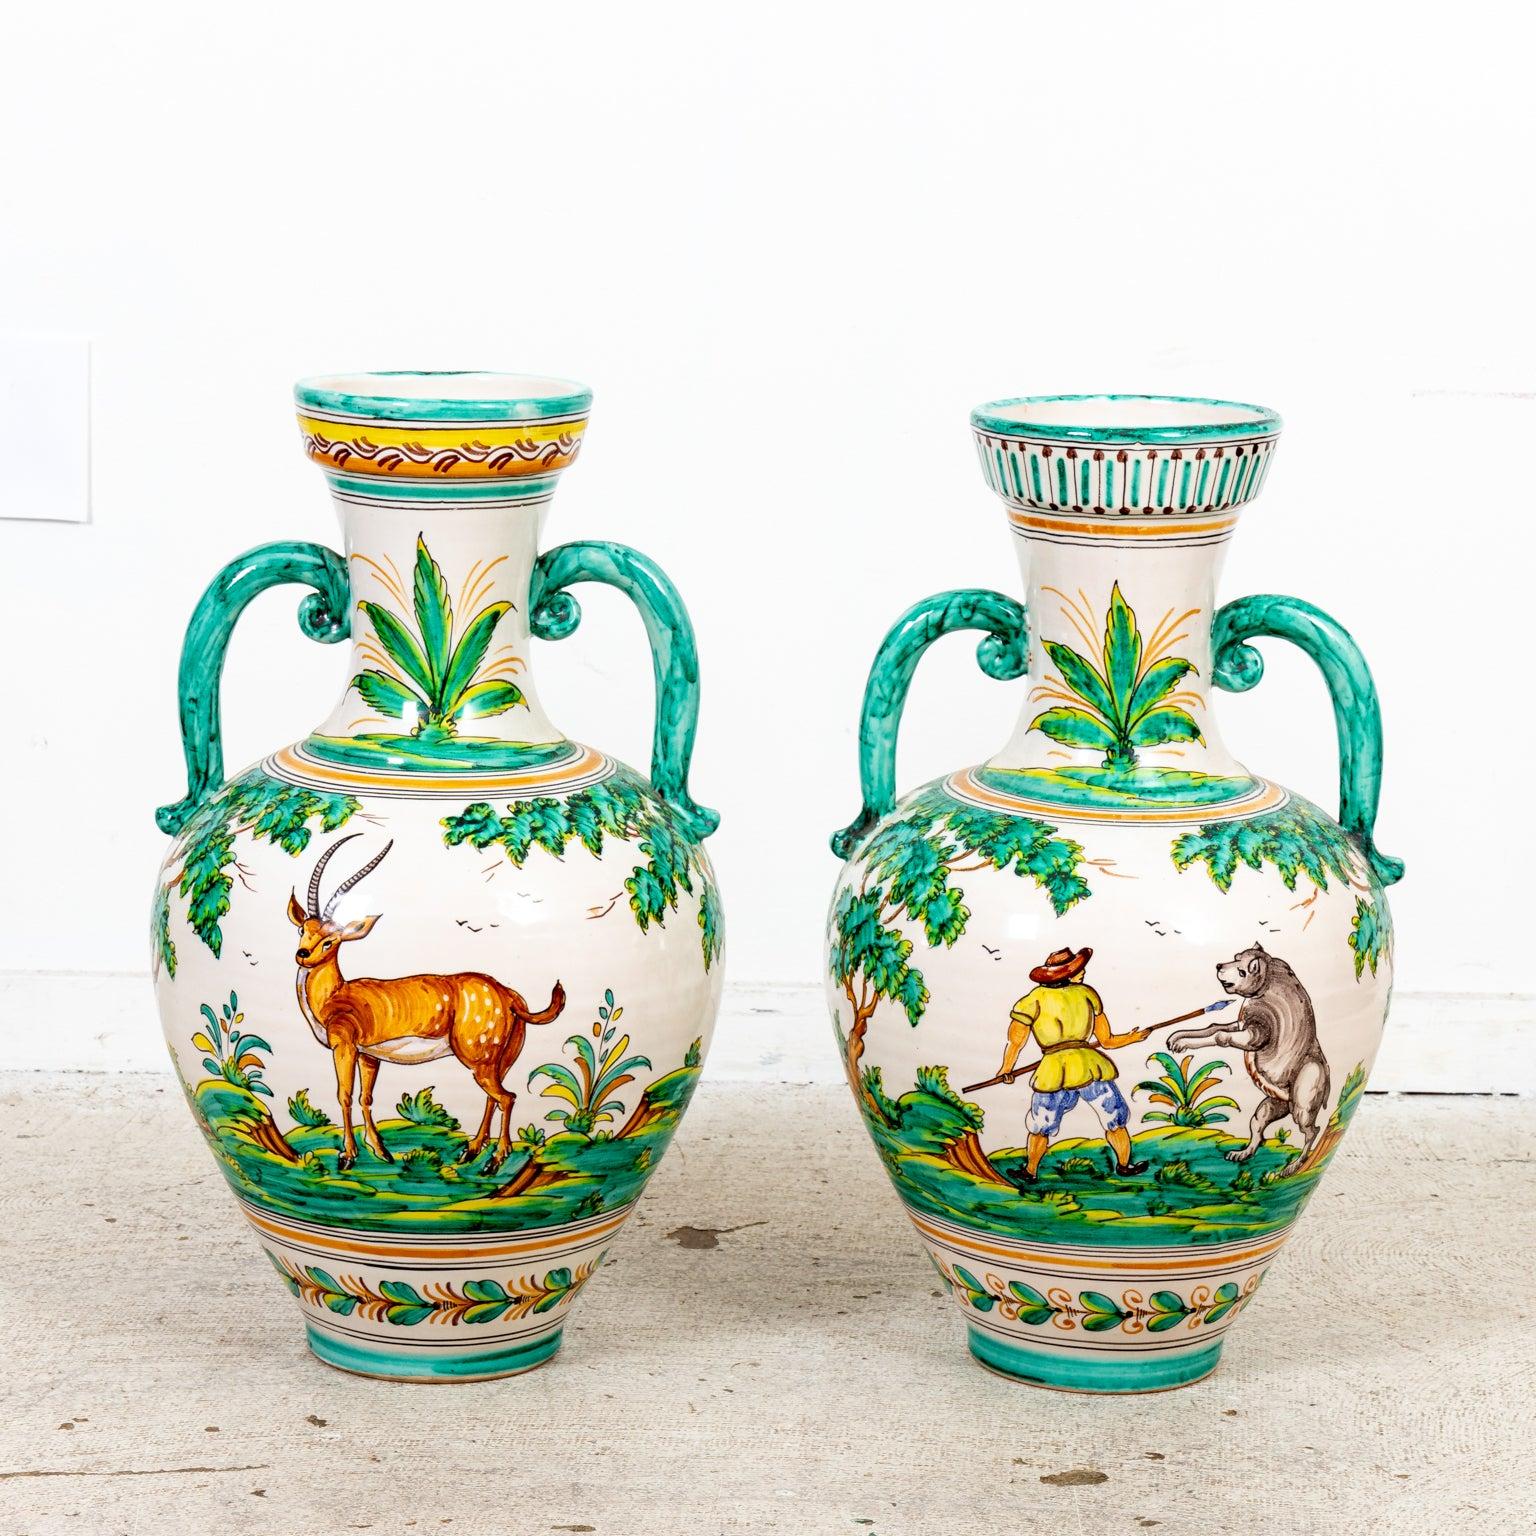 Pair of Spanish Majolica urns in a glazed finish with double handles and floral painted trim. The body of the urns are detailed with a deer illustration, a depiction of a man in an attack stance with a spear fighting against a bear, and a large